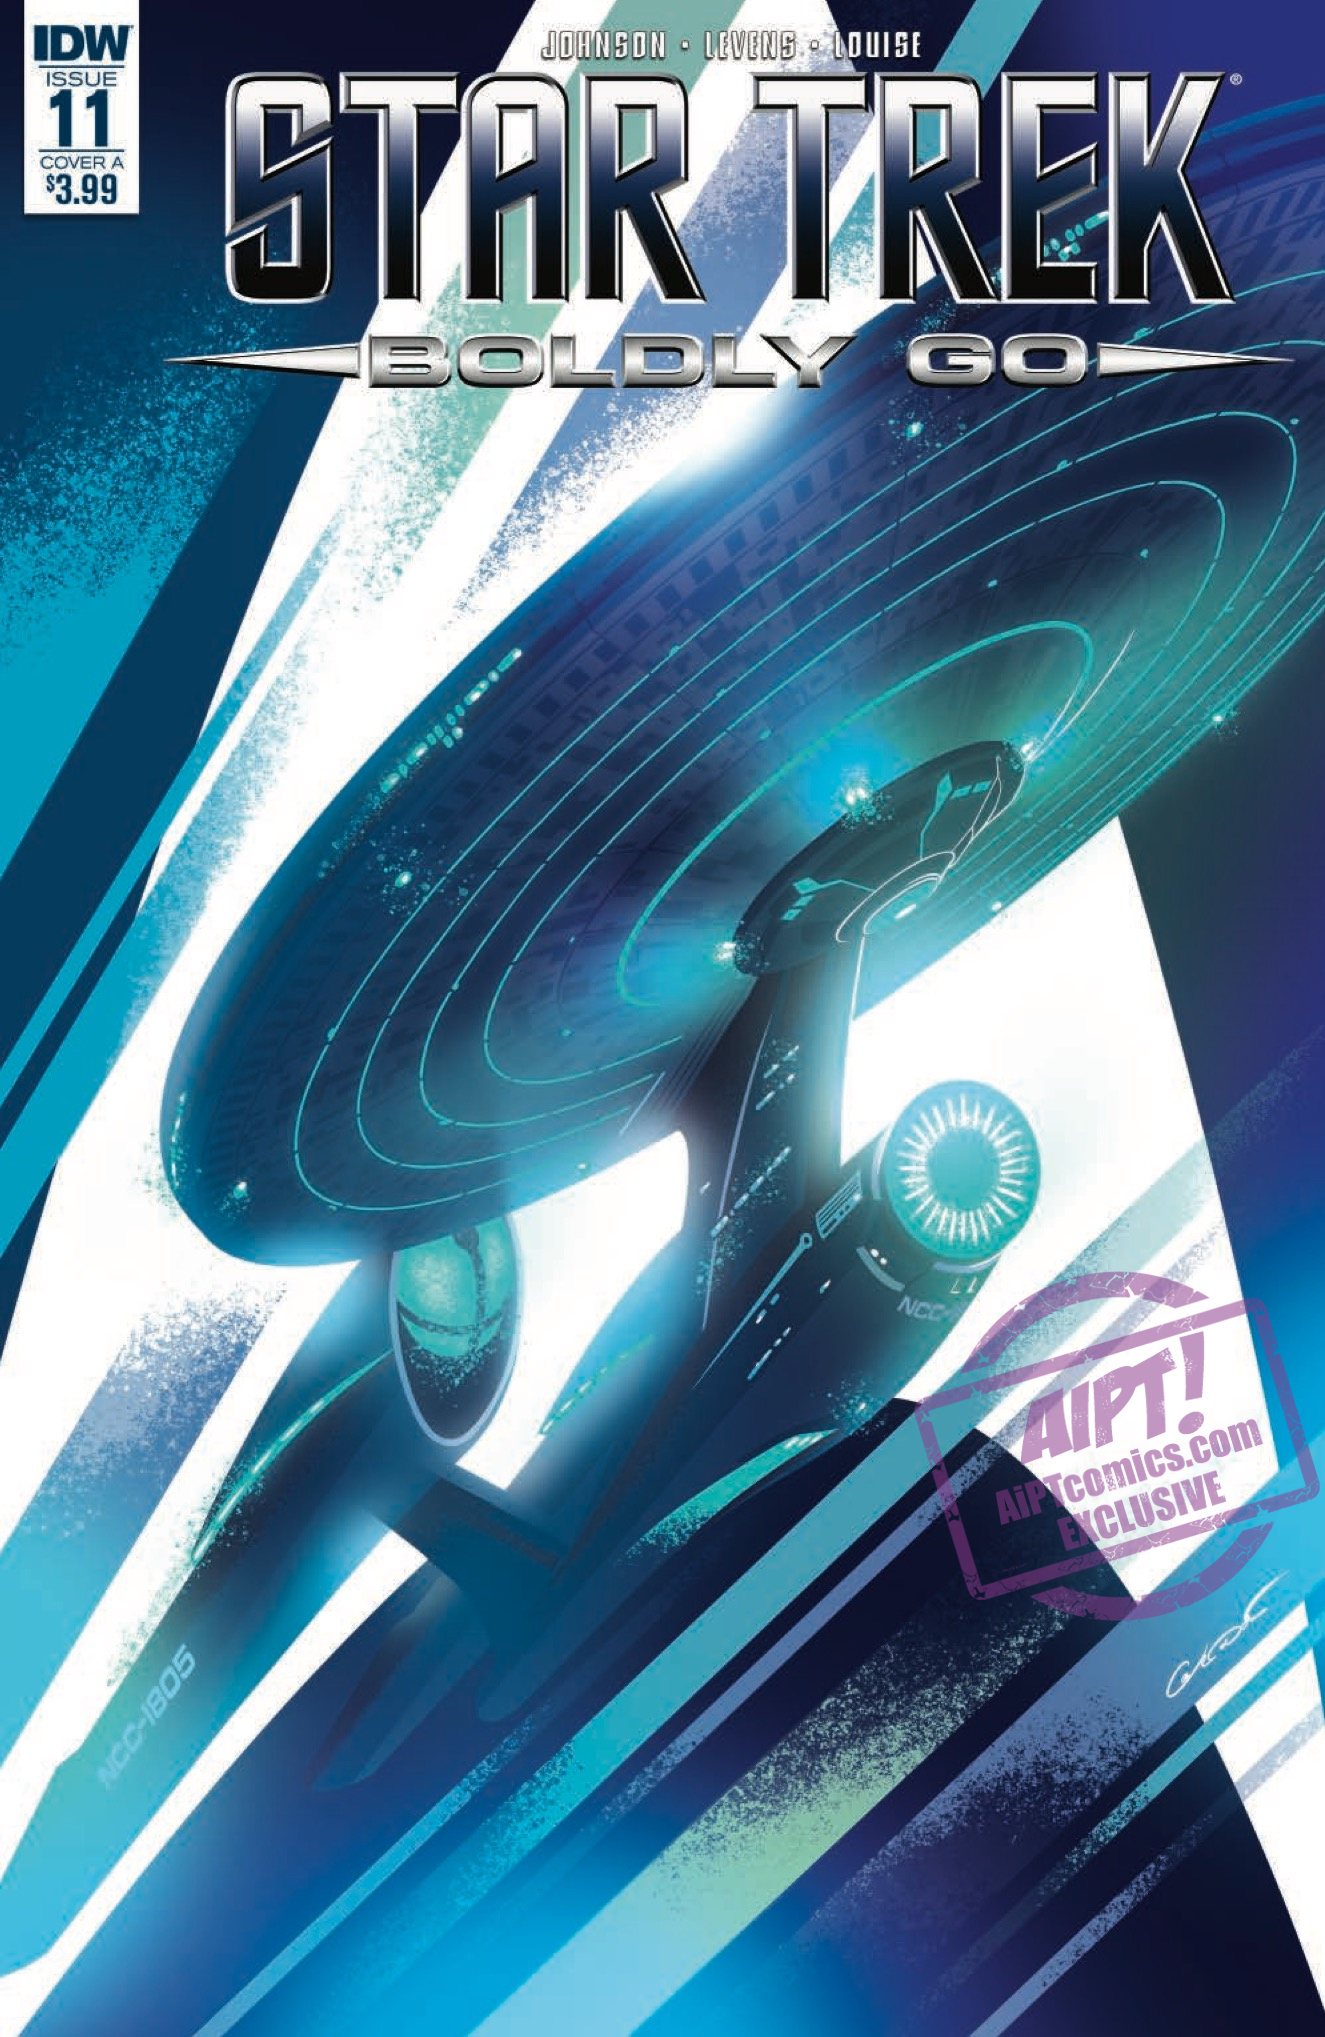 [EXCLUSIVE] IDW Preview: Star Trek: Boldly Go #11